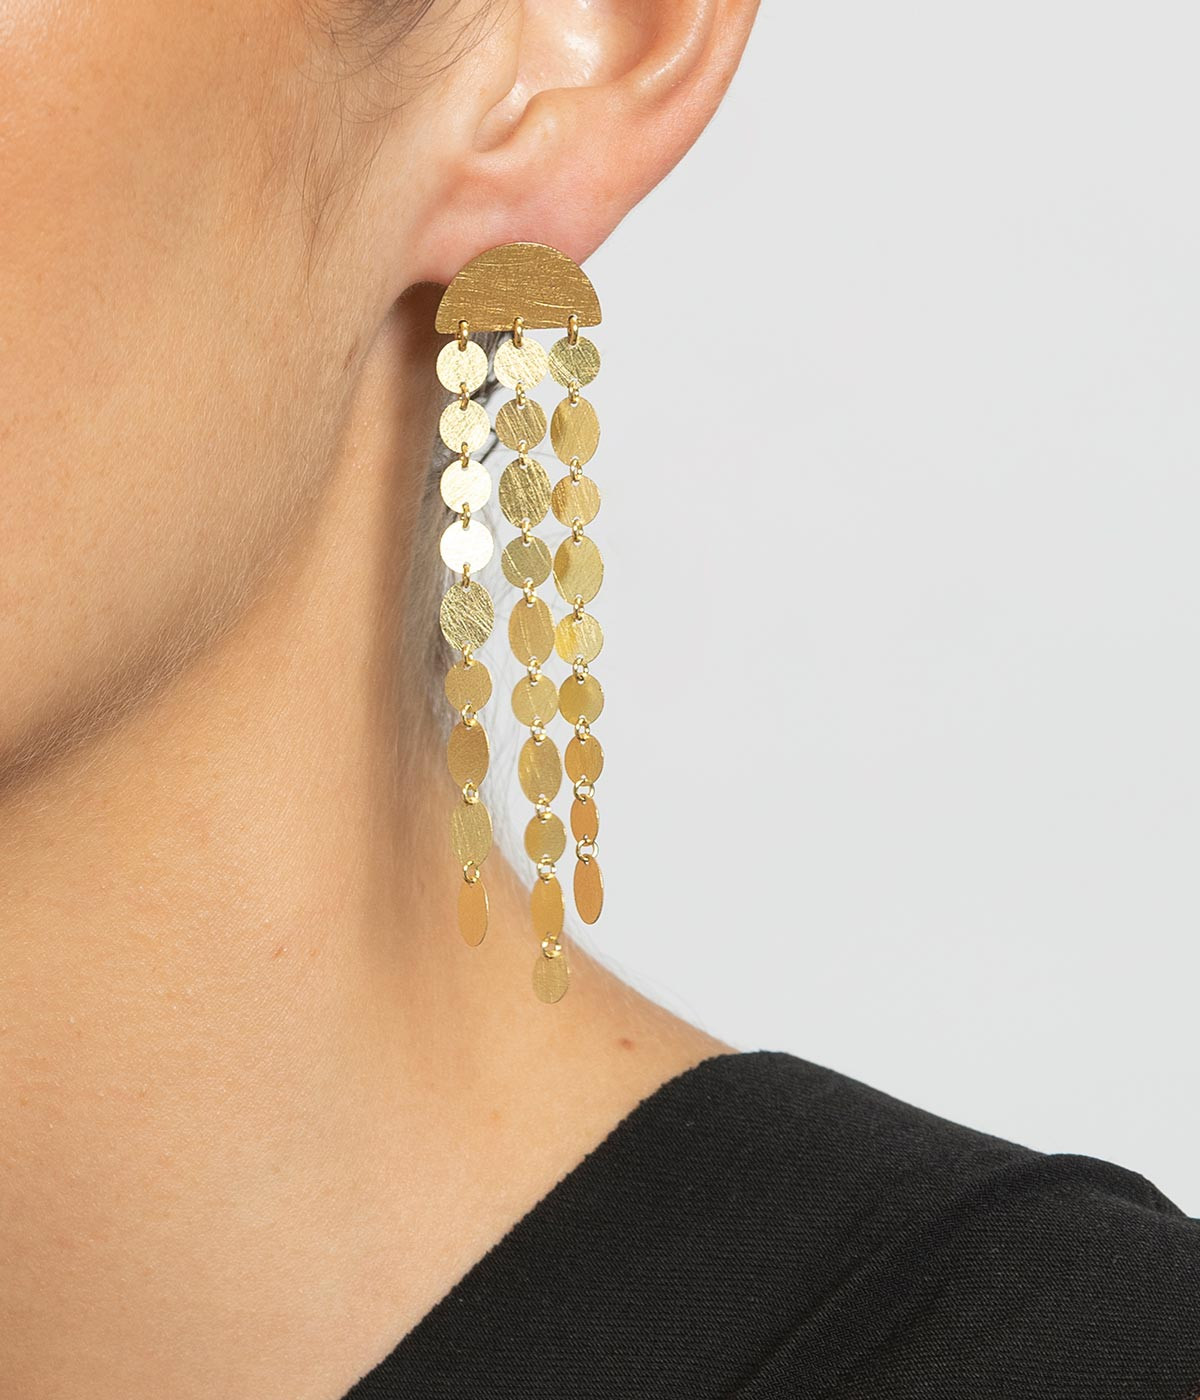 Party earrings with 3 long strips